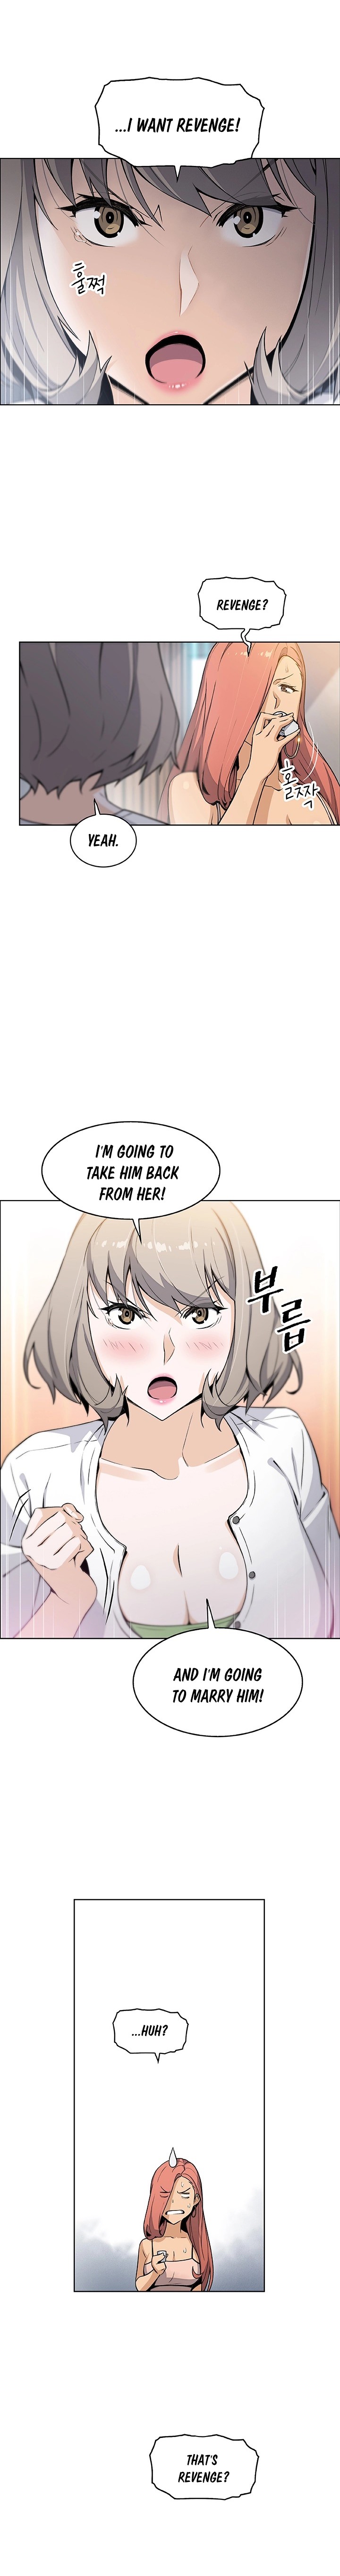 Housekeeper Manhwa - Chapter 34 Page 3